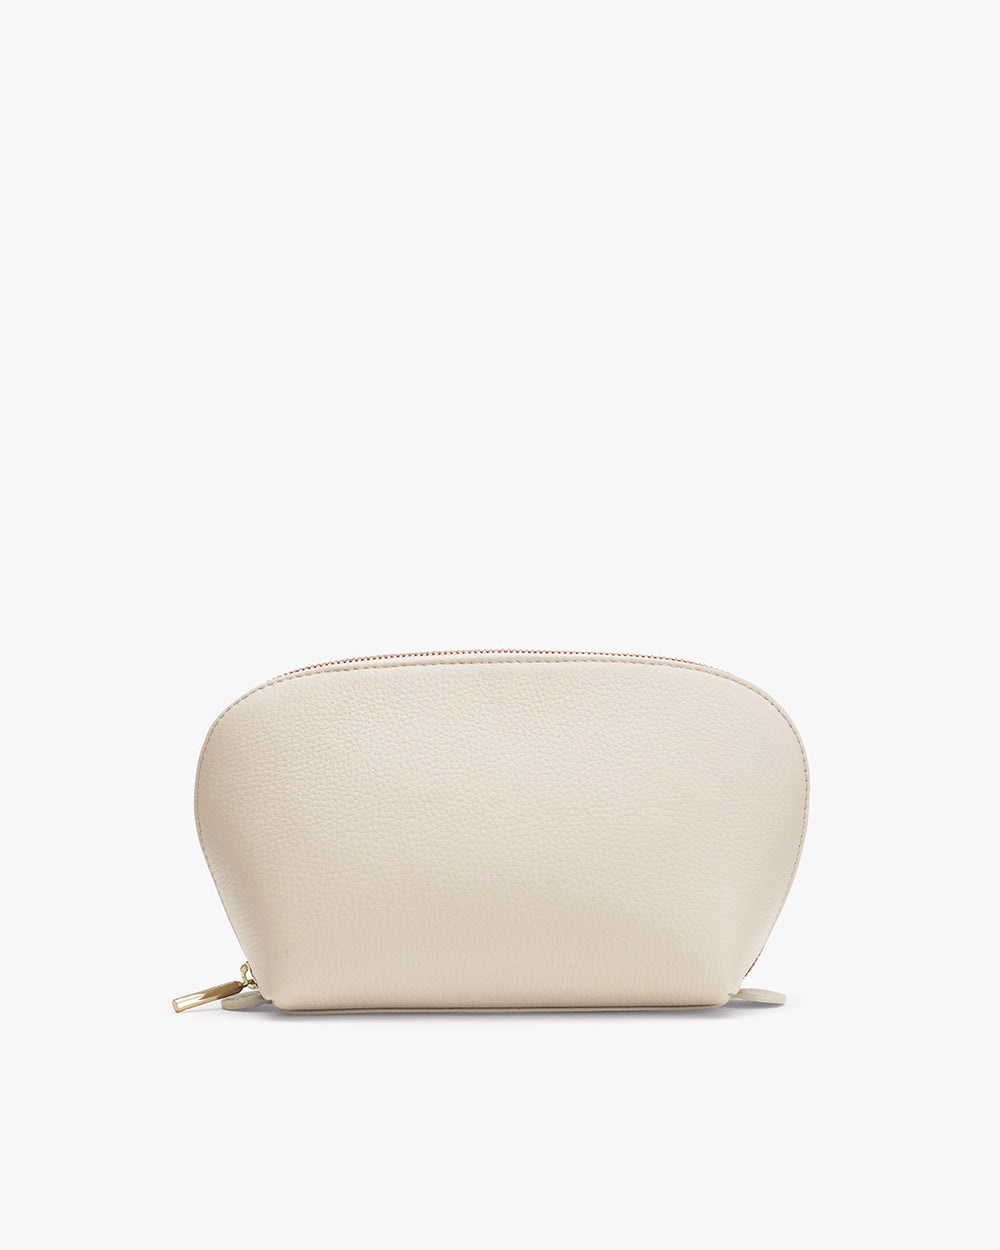 Cosmetic pouch with zipper on a plain background.